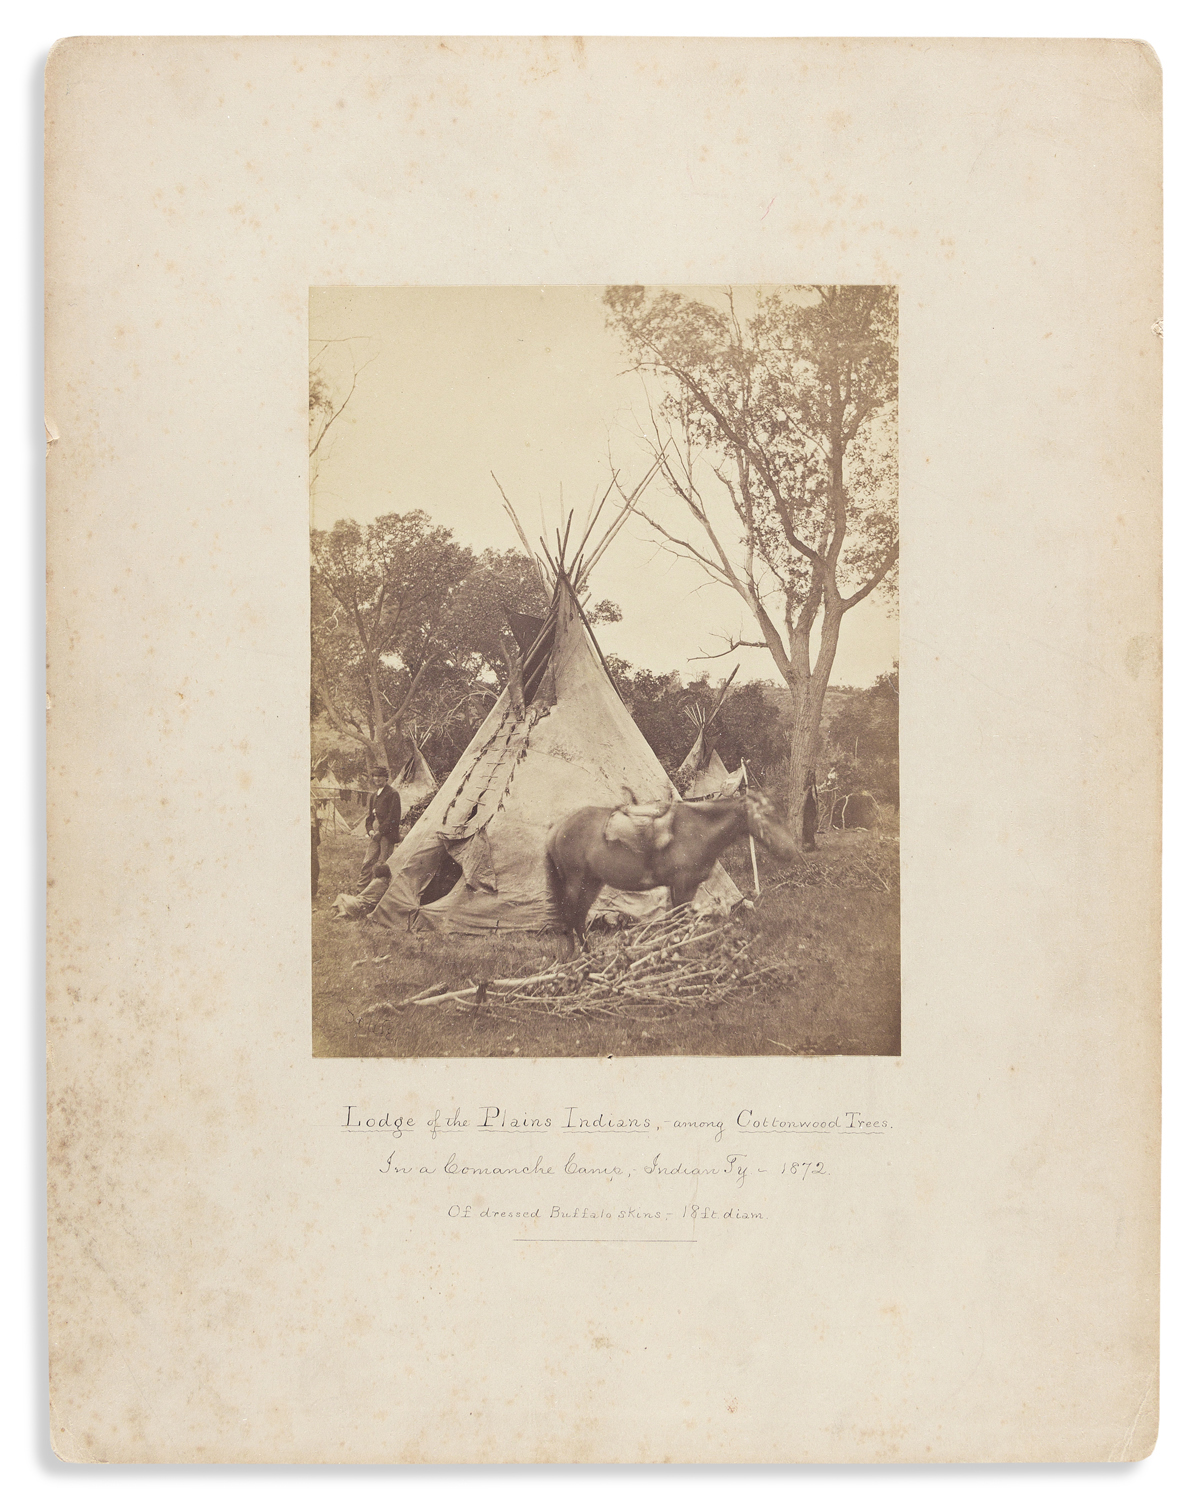 (AMERICAN INDIANS--PHOTOGRAPHS.) William Soule. Lodge of the Plains Indians among the Cottonwood Trees in a Comanche Camp . . .